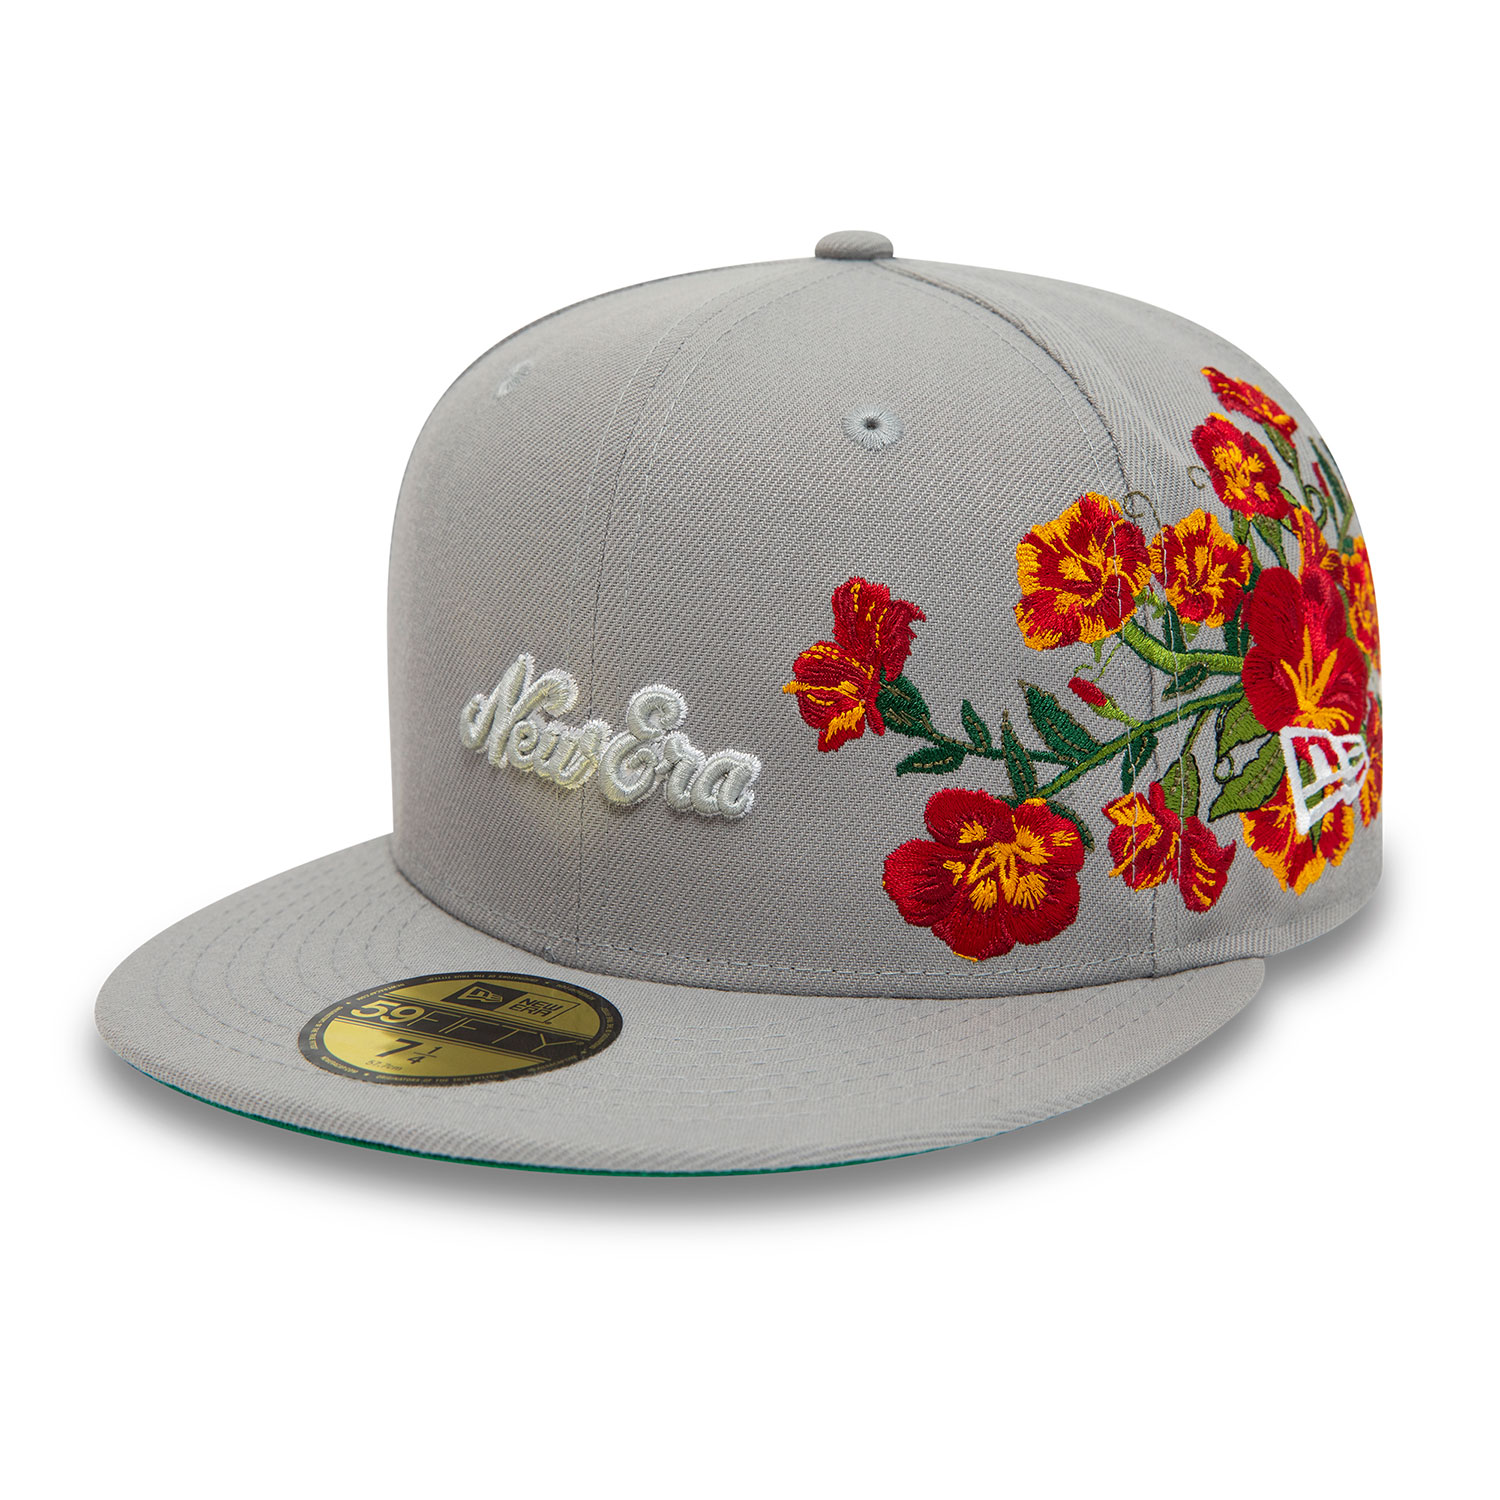 Official New Era Floral Grey 59FIFTY Fitted Cap B9823_1135 | New Era ...